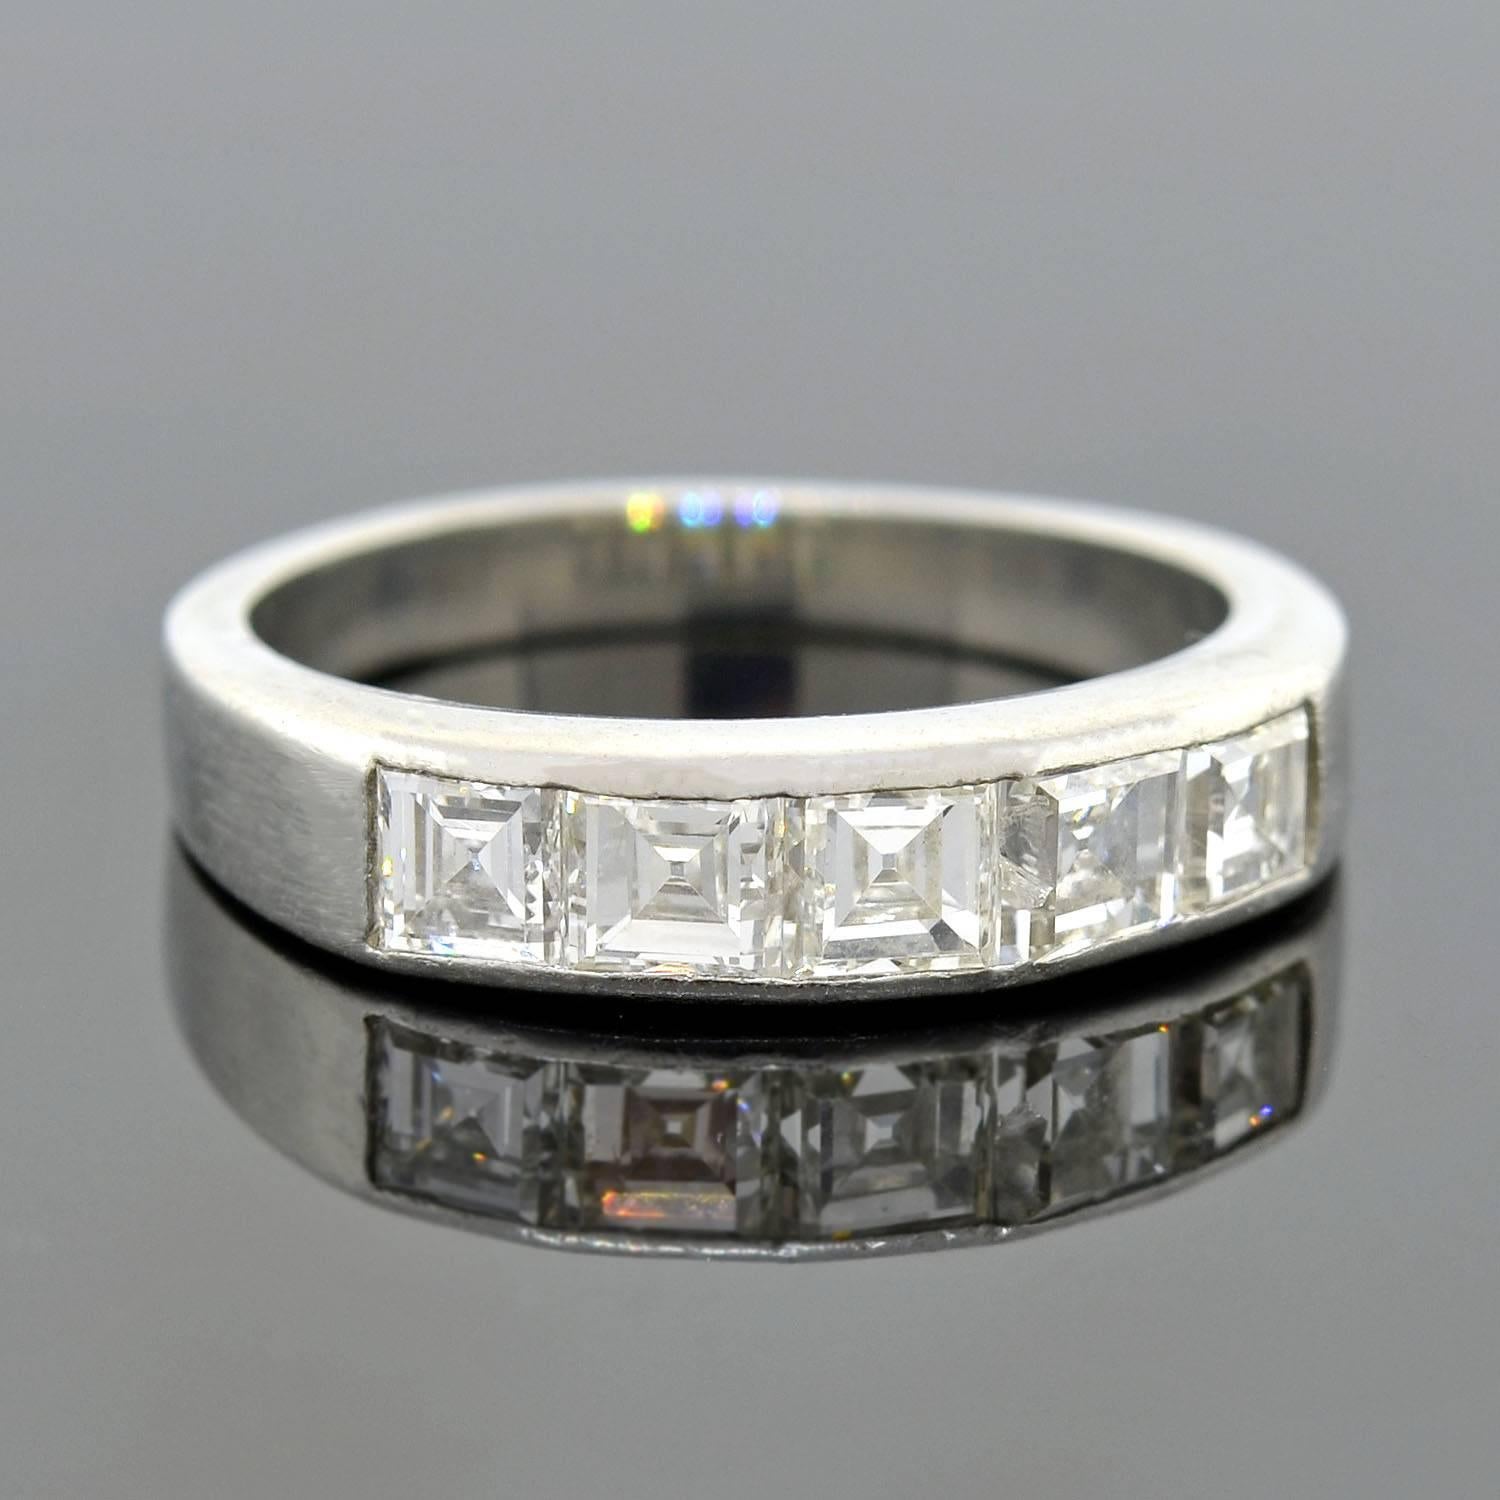 This vintage diamond half band from the 1960s is simply gorgeous! The ring is made of platinum and features a row of 5 Fancy Square Cut diamonds that line the front. Each diamond weighs approximately 0.25ct and rests in a seamless channel setting,